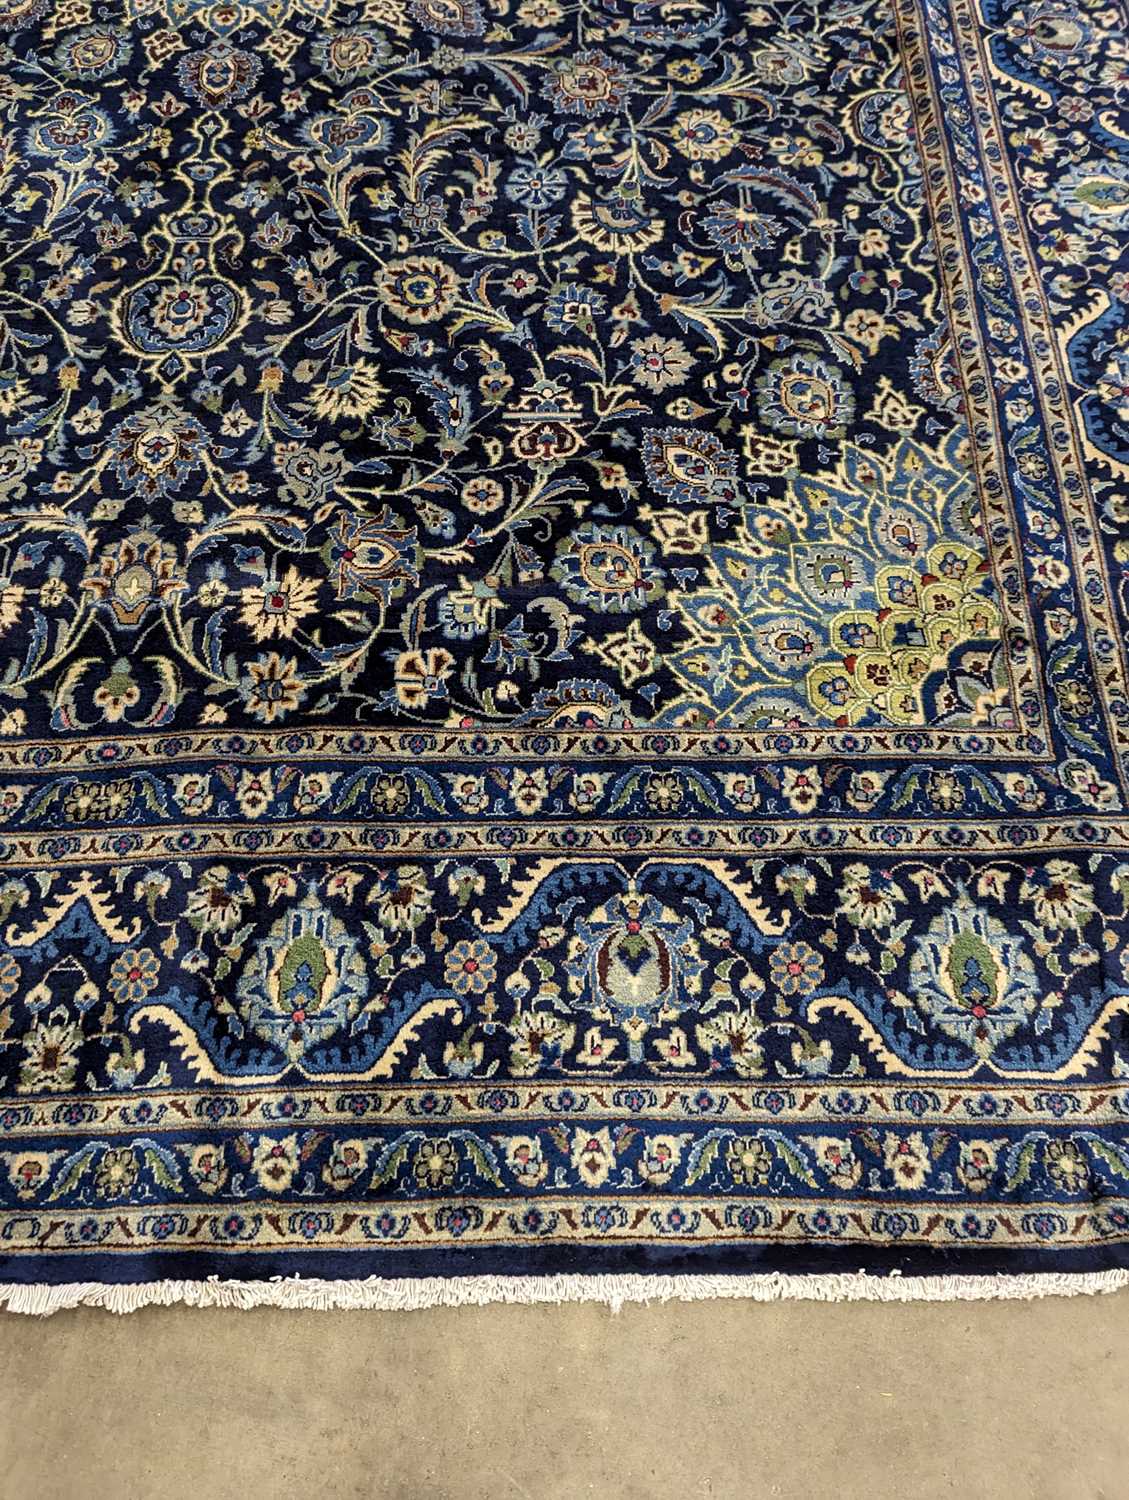 A Meshed carpet, - Image 21 of 30